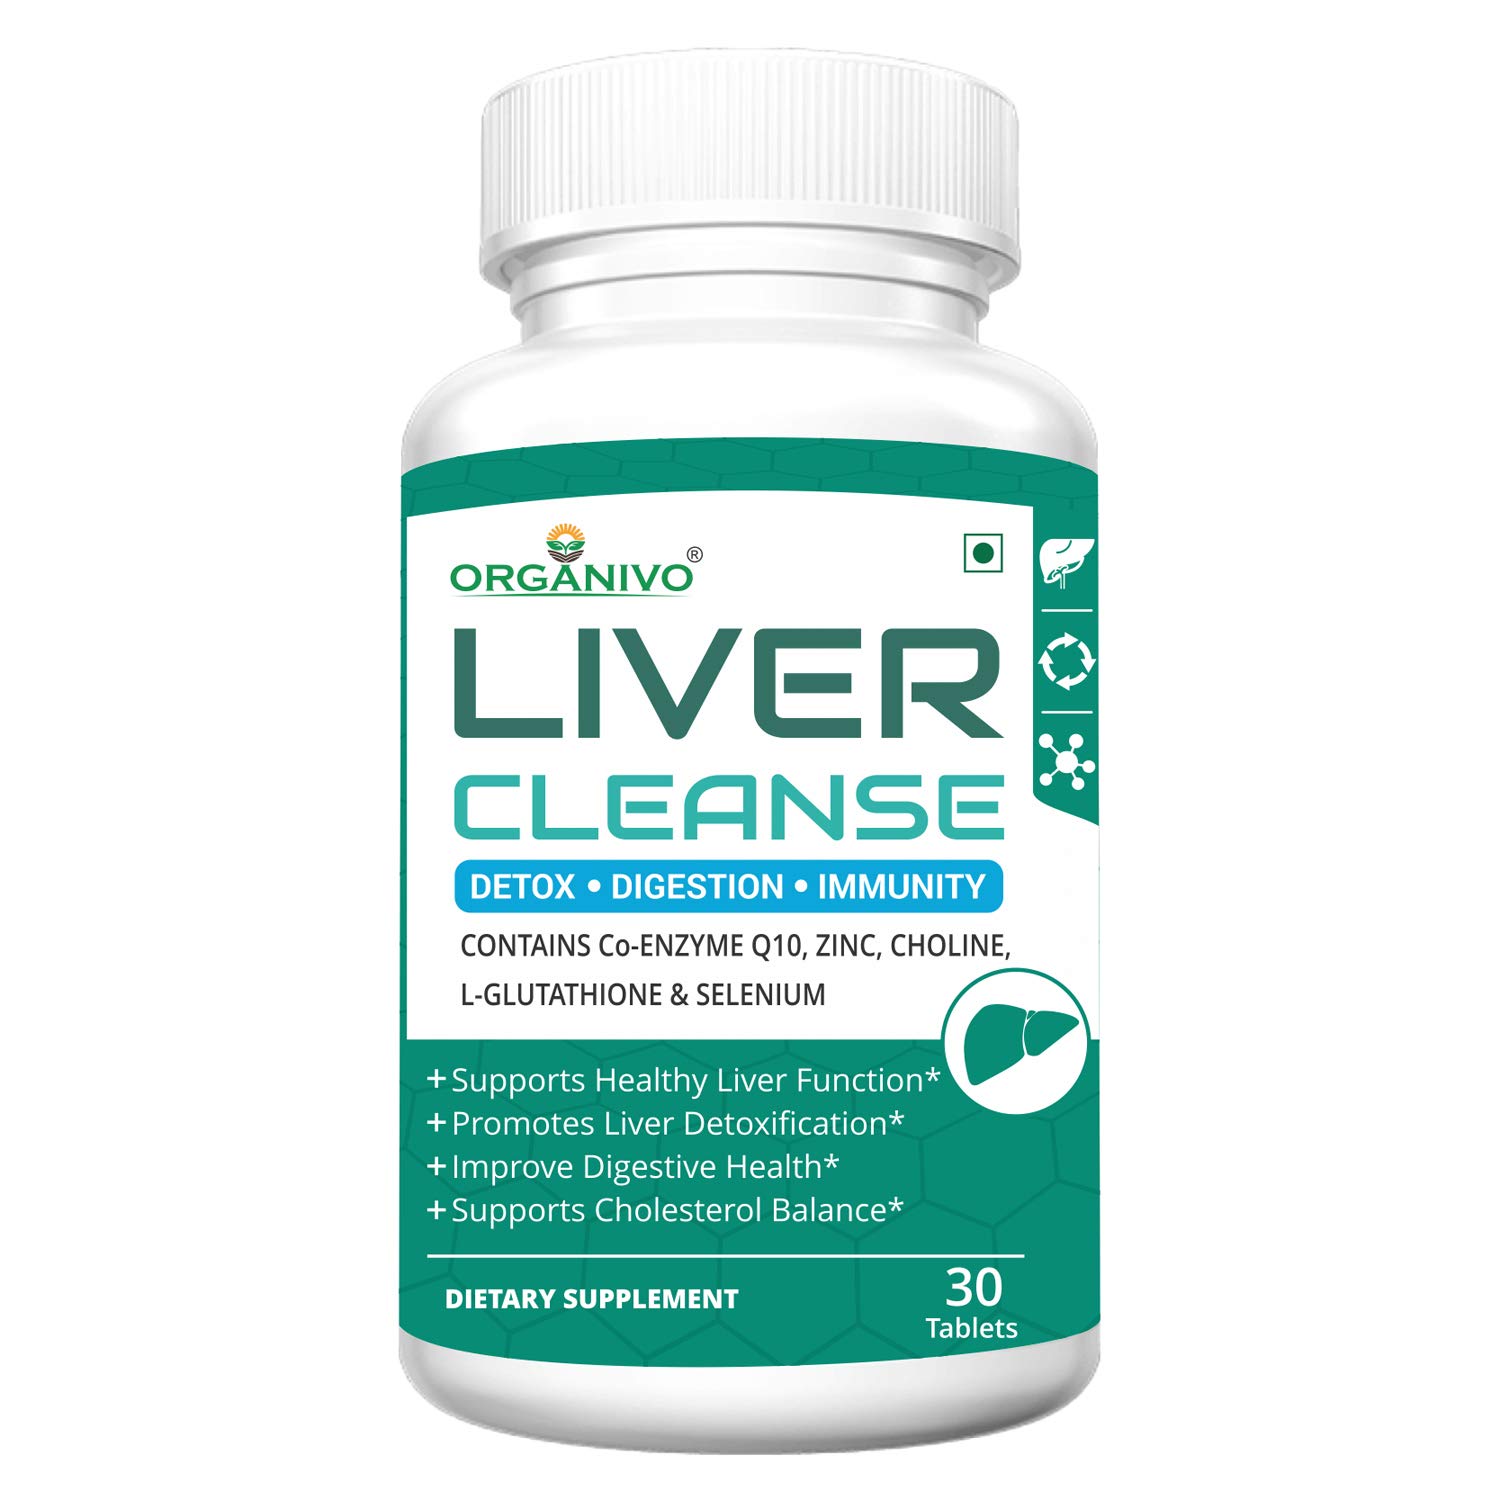 Organivo Liver Cleanse Supplement Tablets Image